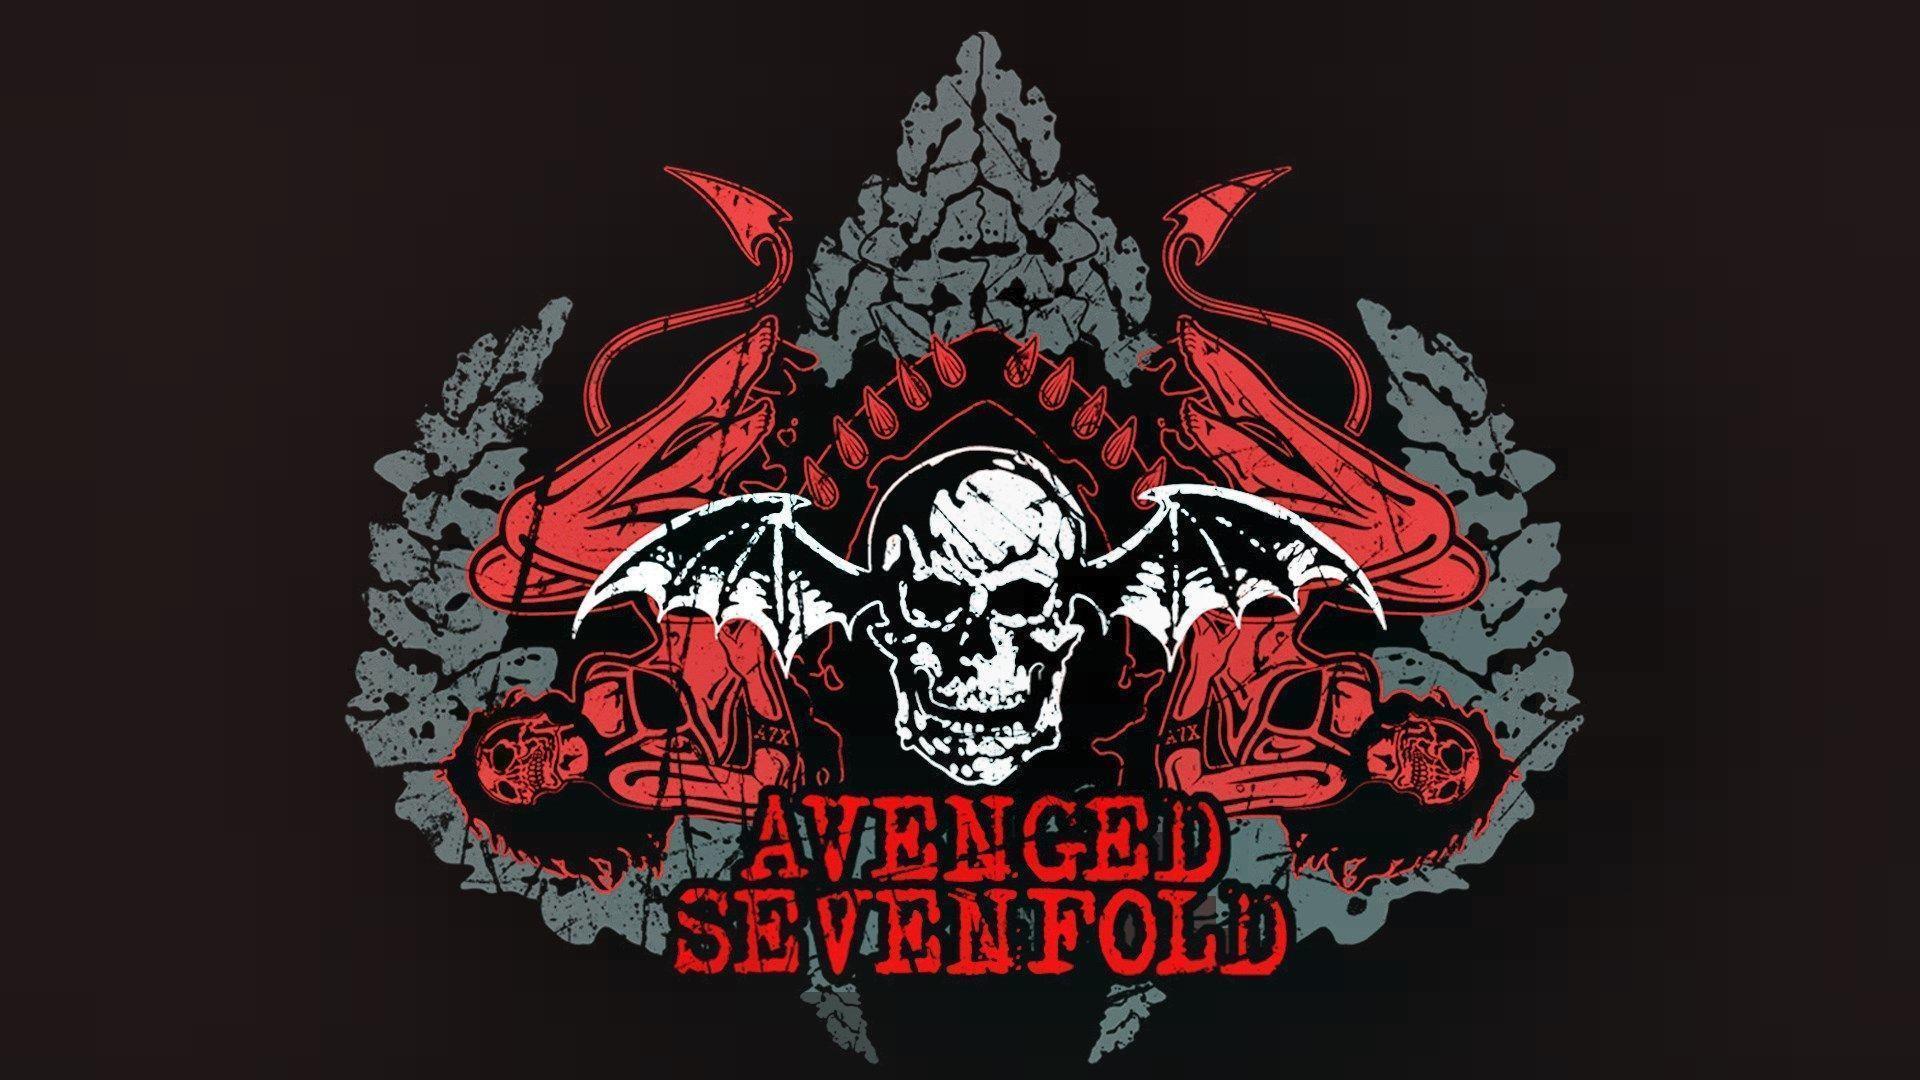 Avenged Sevenfold. Known people people news and biographies